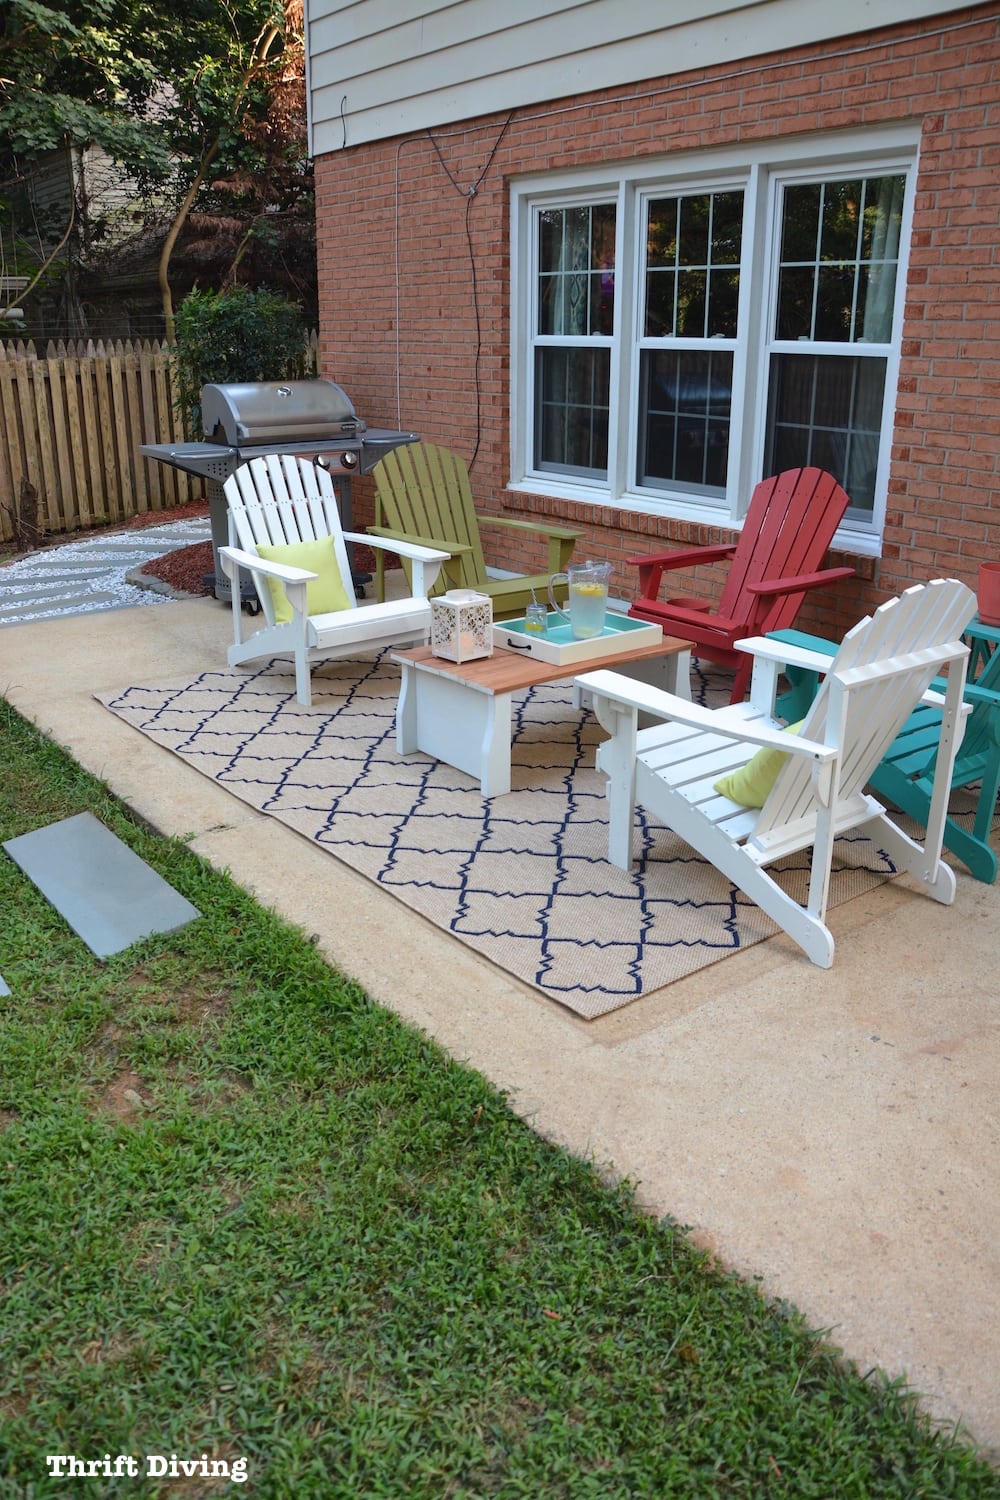 How to Build a Stone Walkway for a Patio Makeover